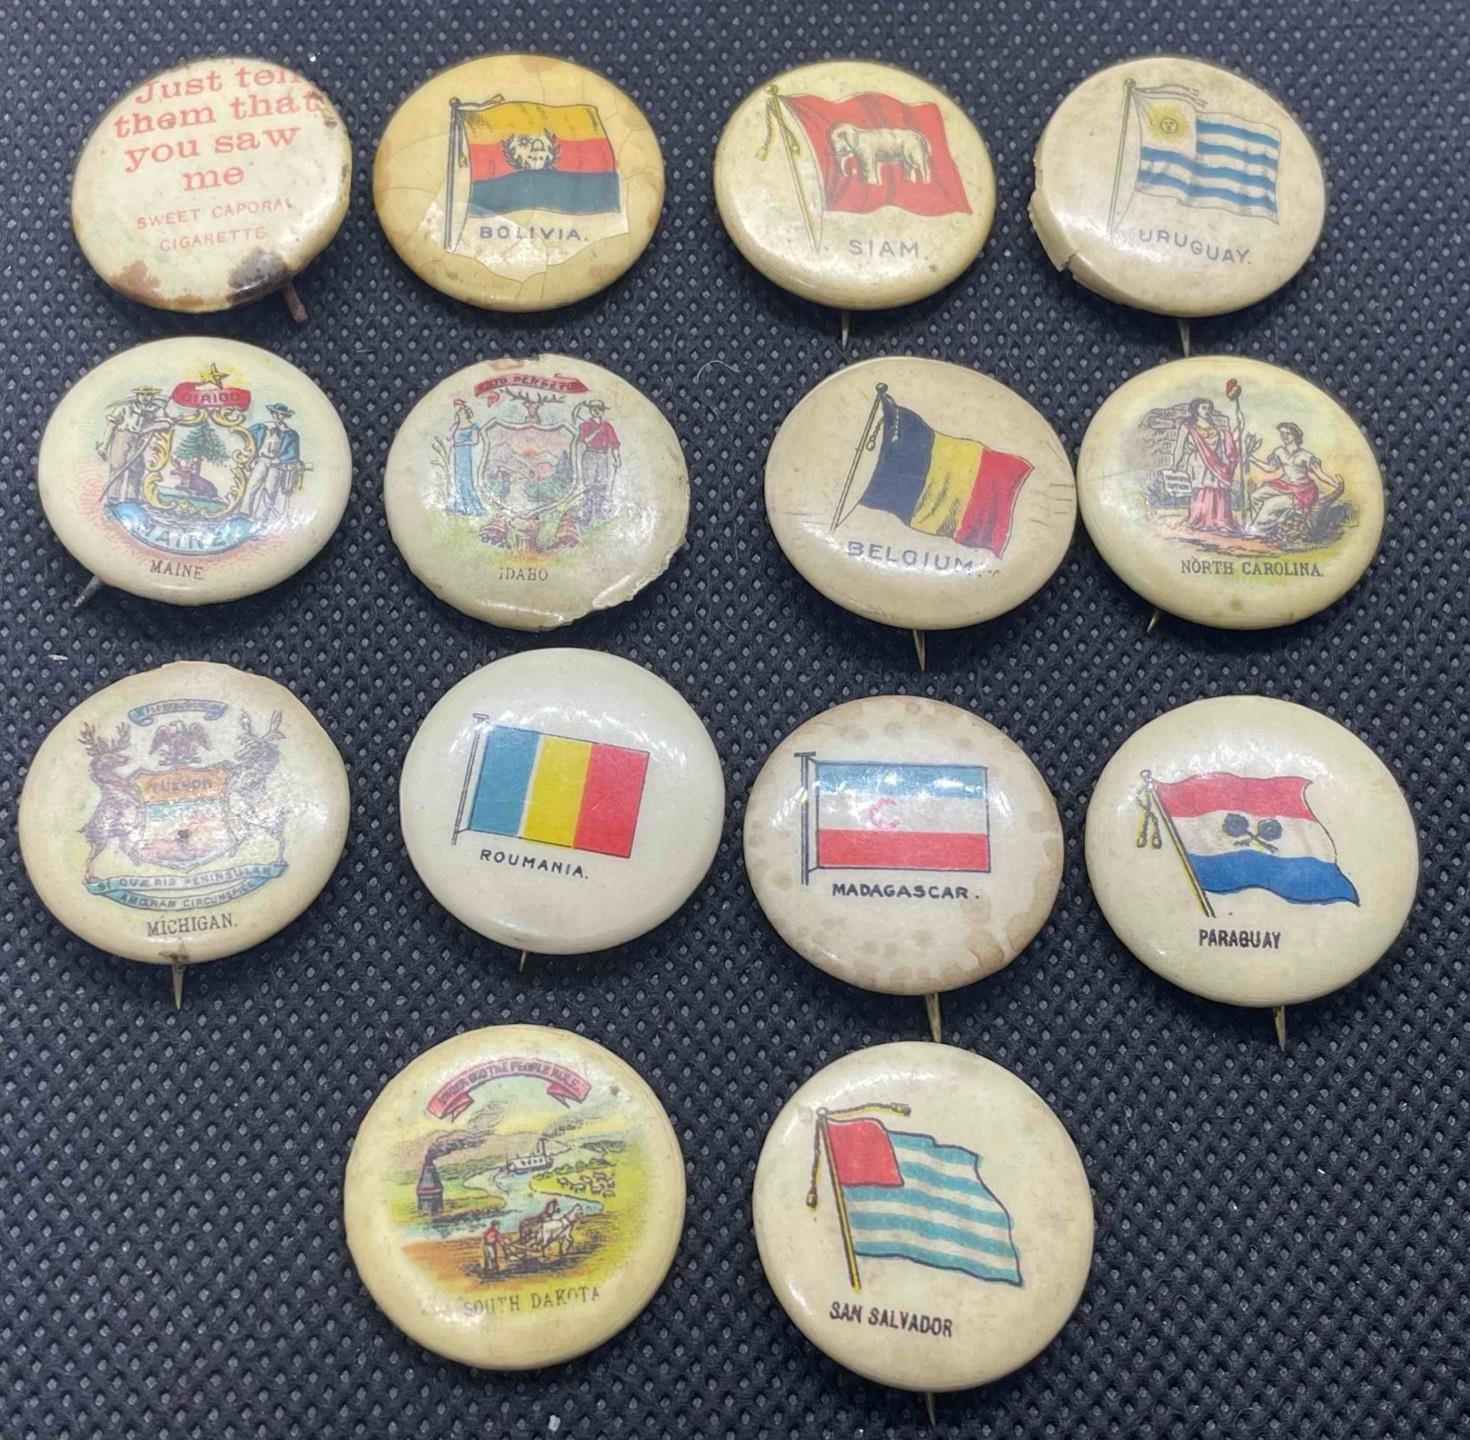 LOT/14 SWEET CAPORAL & DUKE CIGARETTES PINBACKS FLAGS OF STATES & COUNTRIES